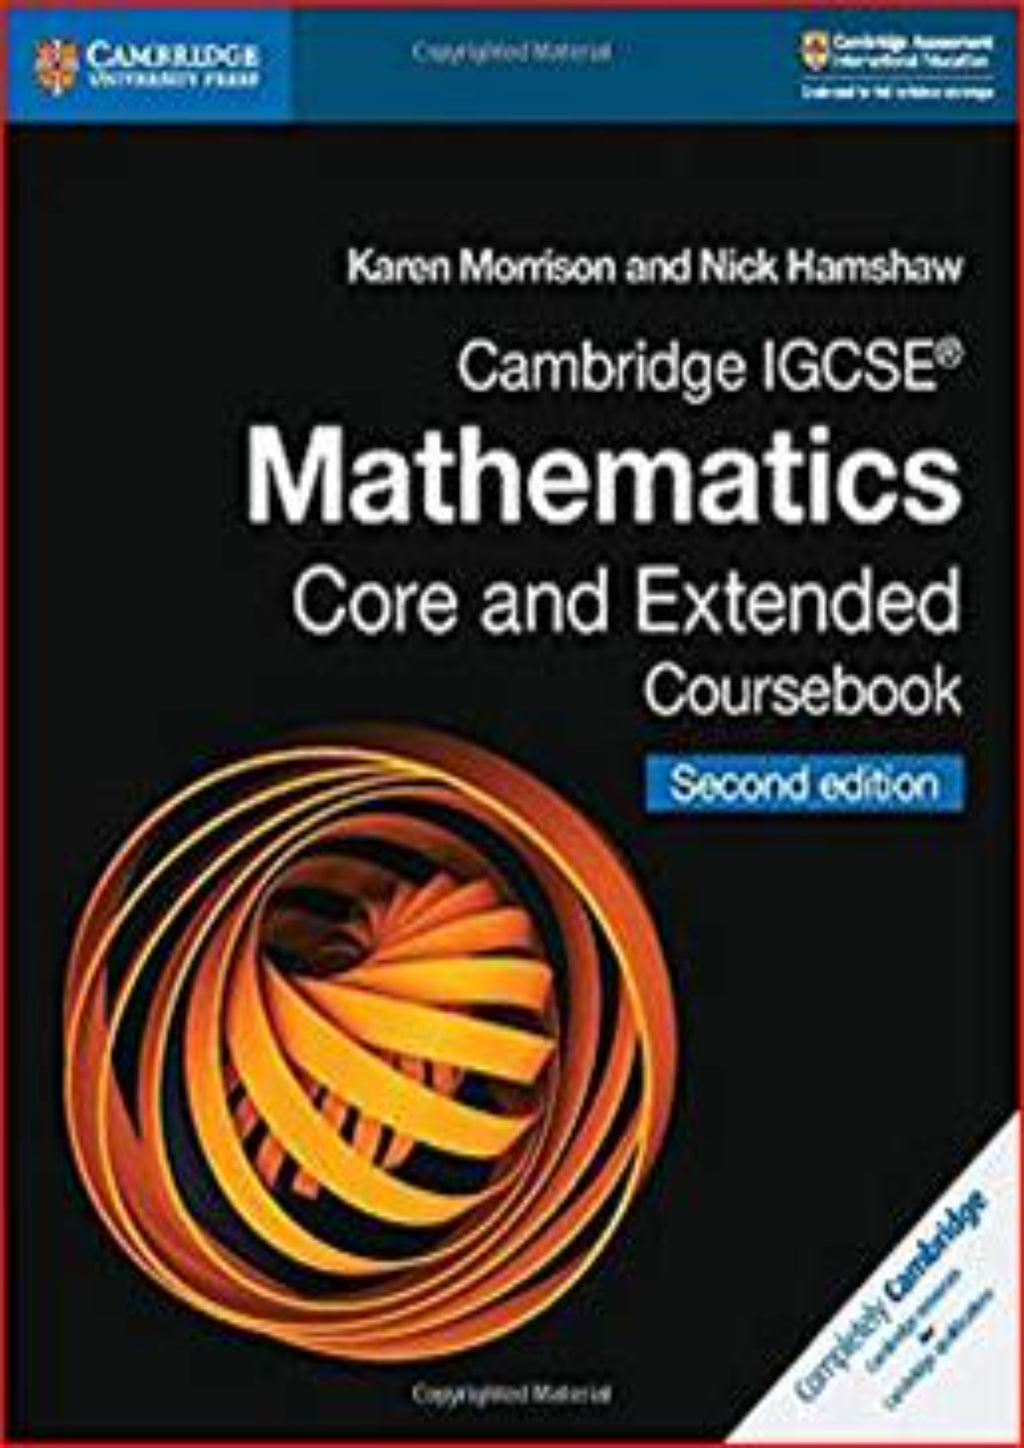 Cambridge IGCSE Mathematics (0580) Core and Extended Coursebook (2nd Edition)